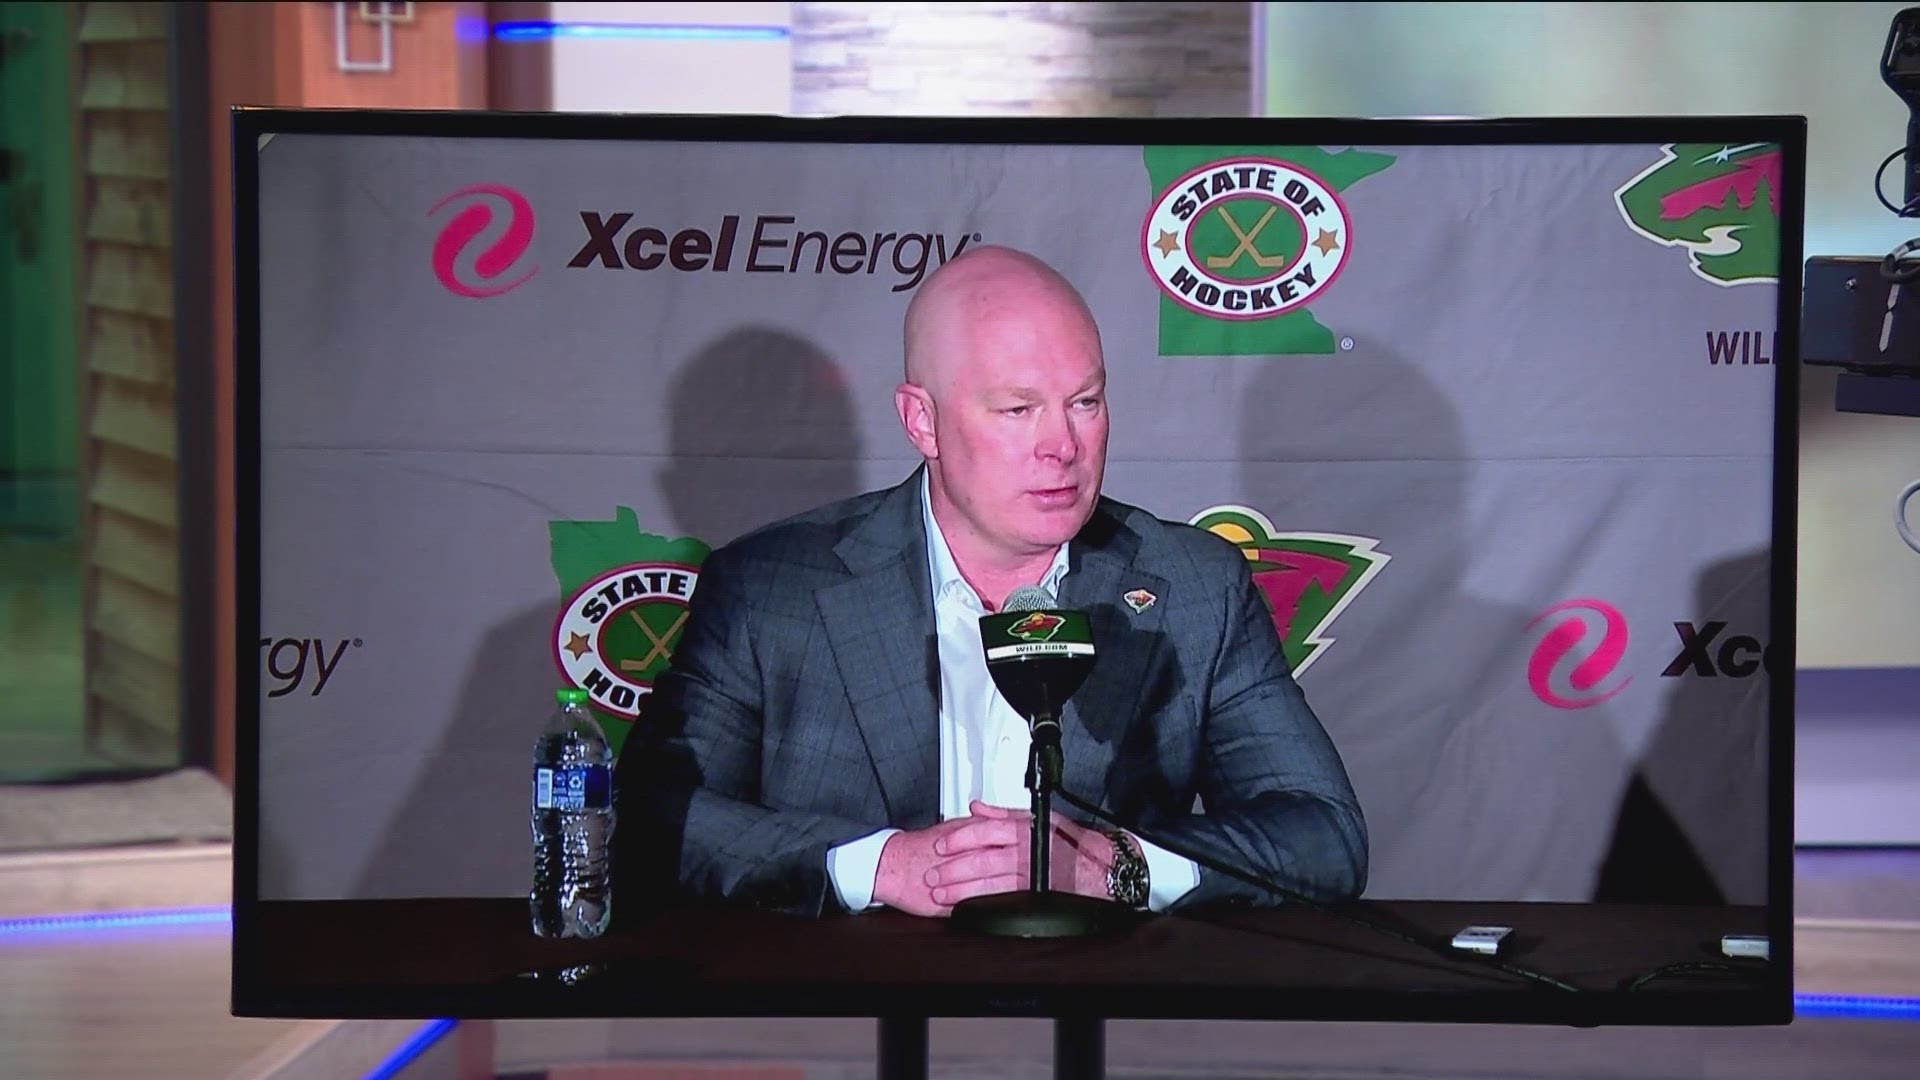 His Minnesota stop is the third NHL bench job for new Wild head coach John Hynes. So why exactly do the same coaches keep get jobs after being fired